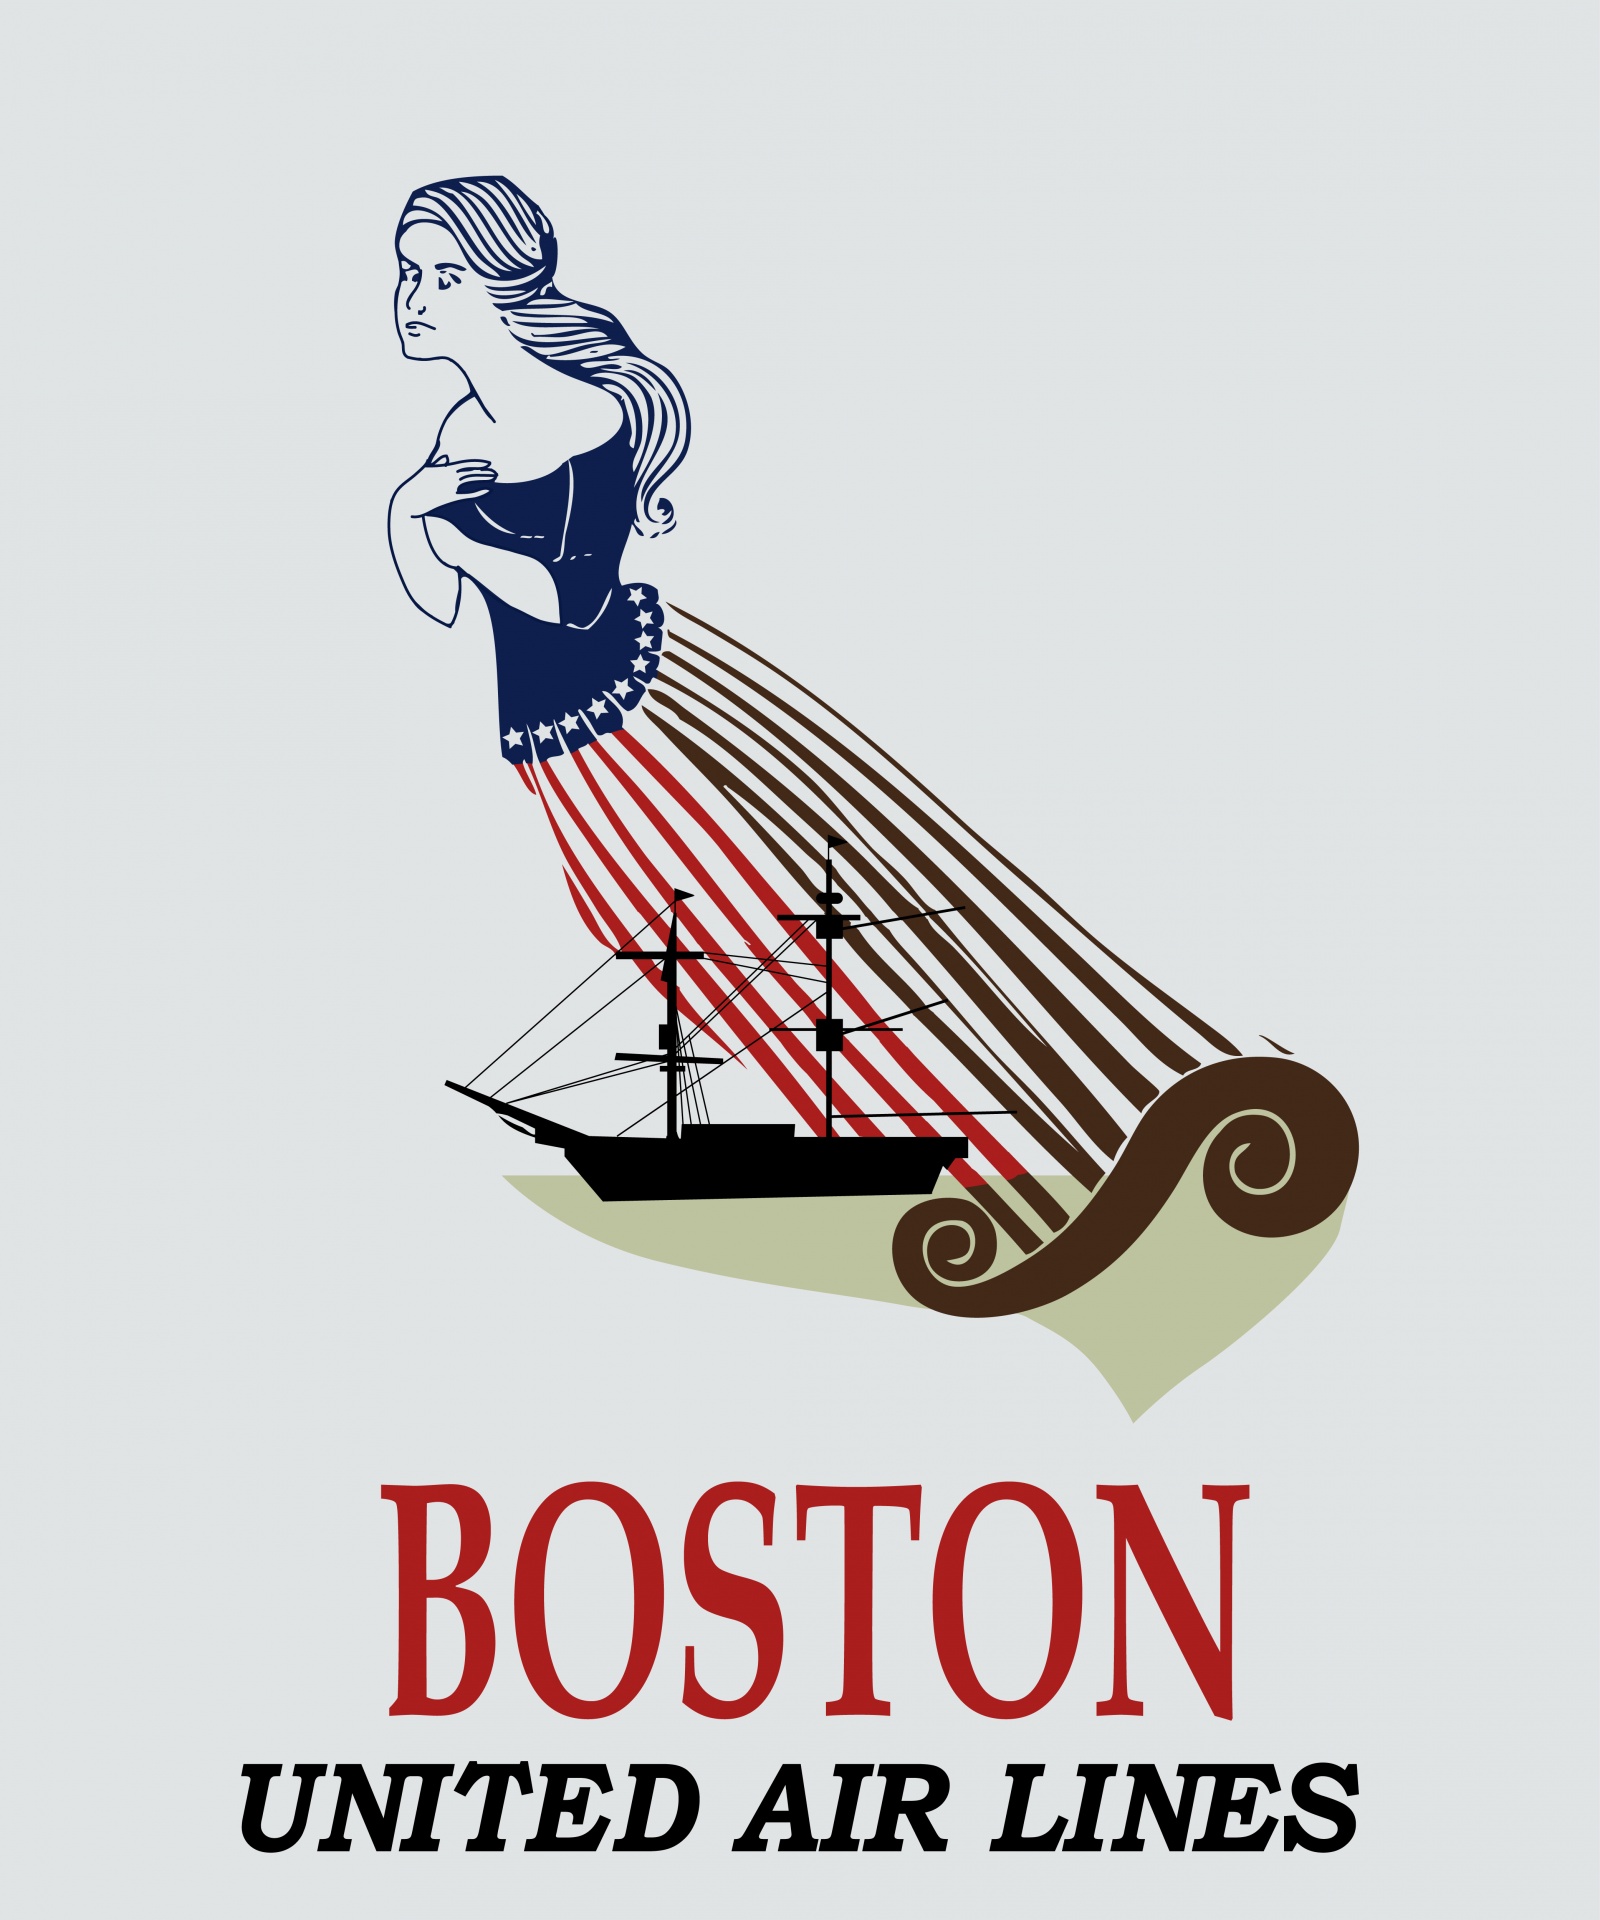 Modern reproduction of Boston Airlines vintage, retro poster